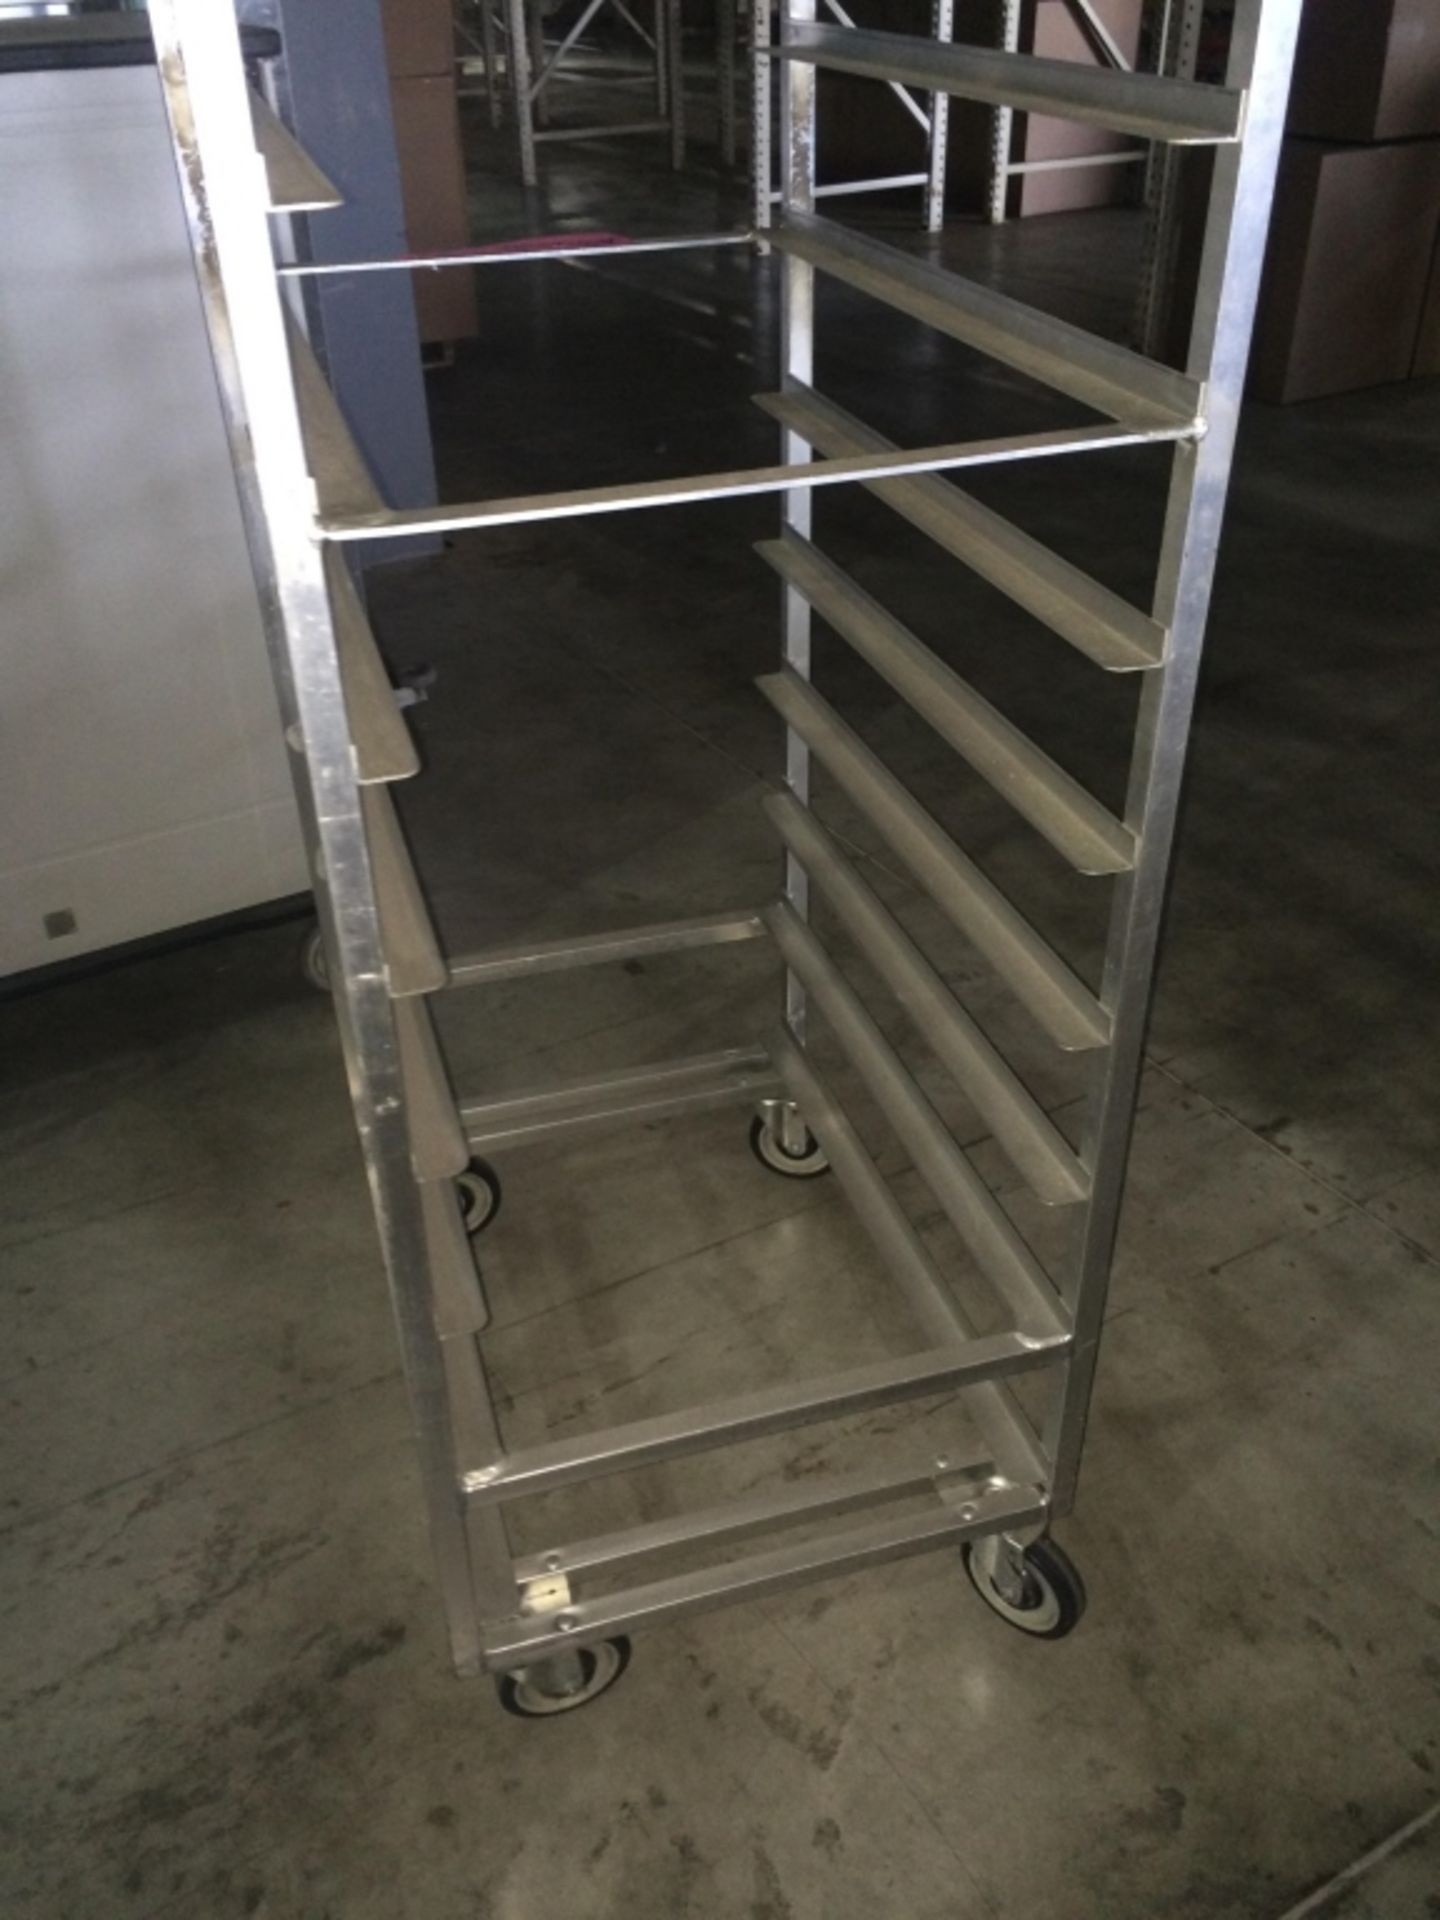 Commerical Rack 10 Tier - Image 3 of 3